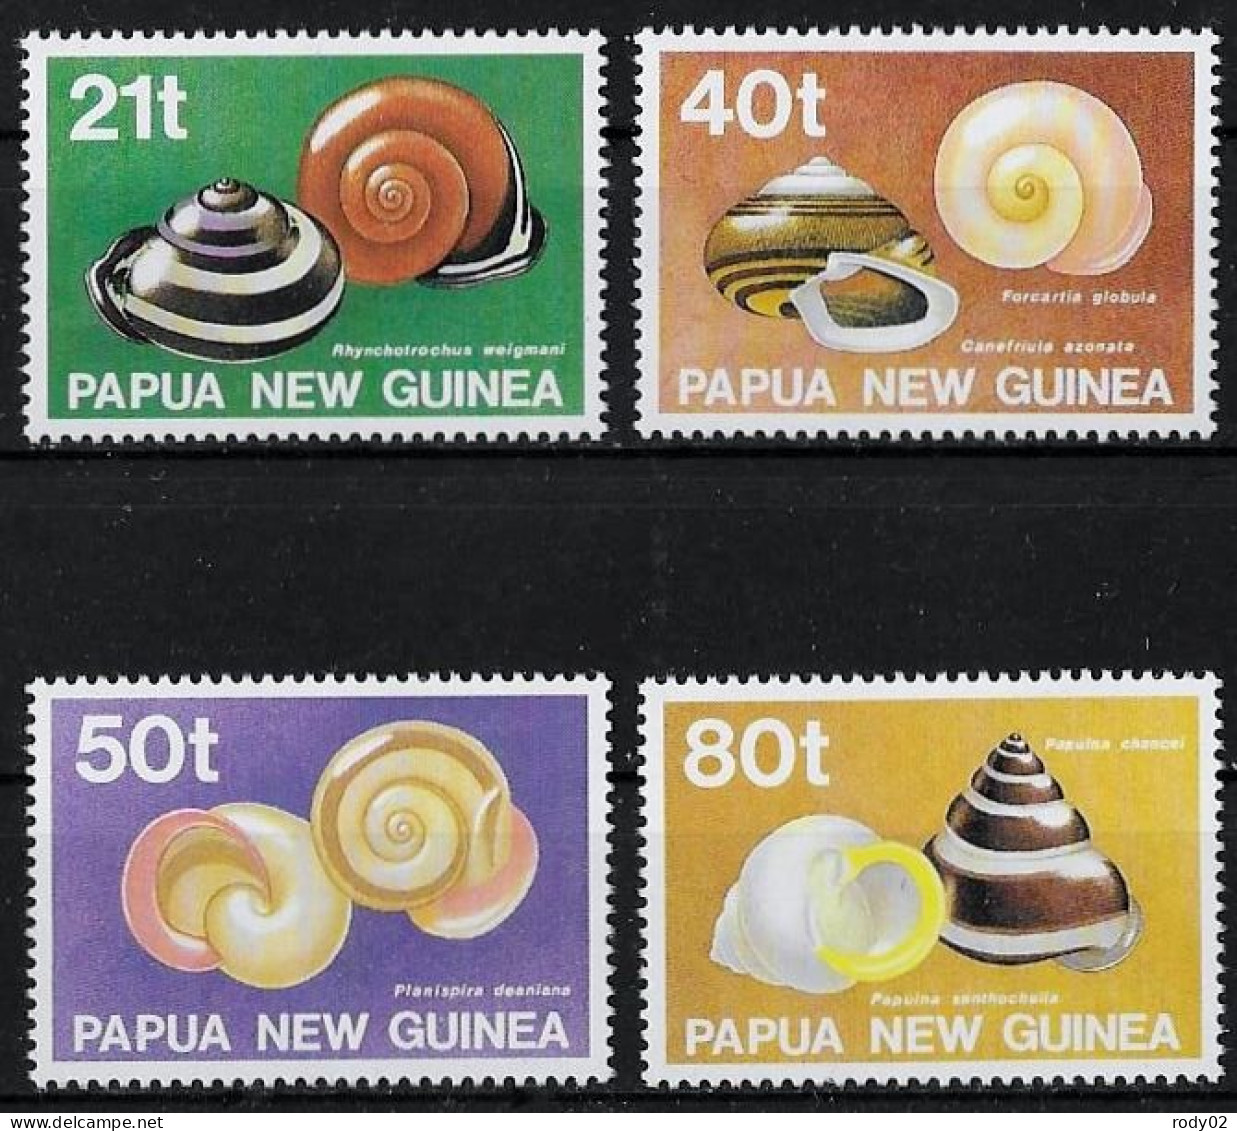 PAPOUASIE NOUVELLE-GUINEE - COQUILLAGES - N° 626 A 629 - NEUF** MNH - Conchiglie